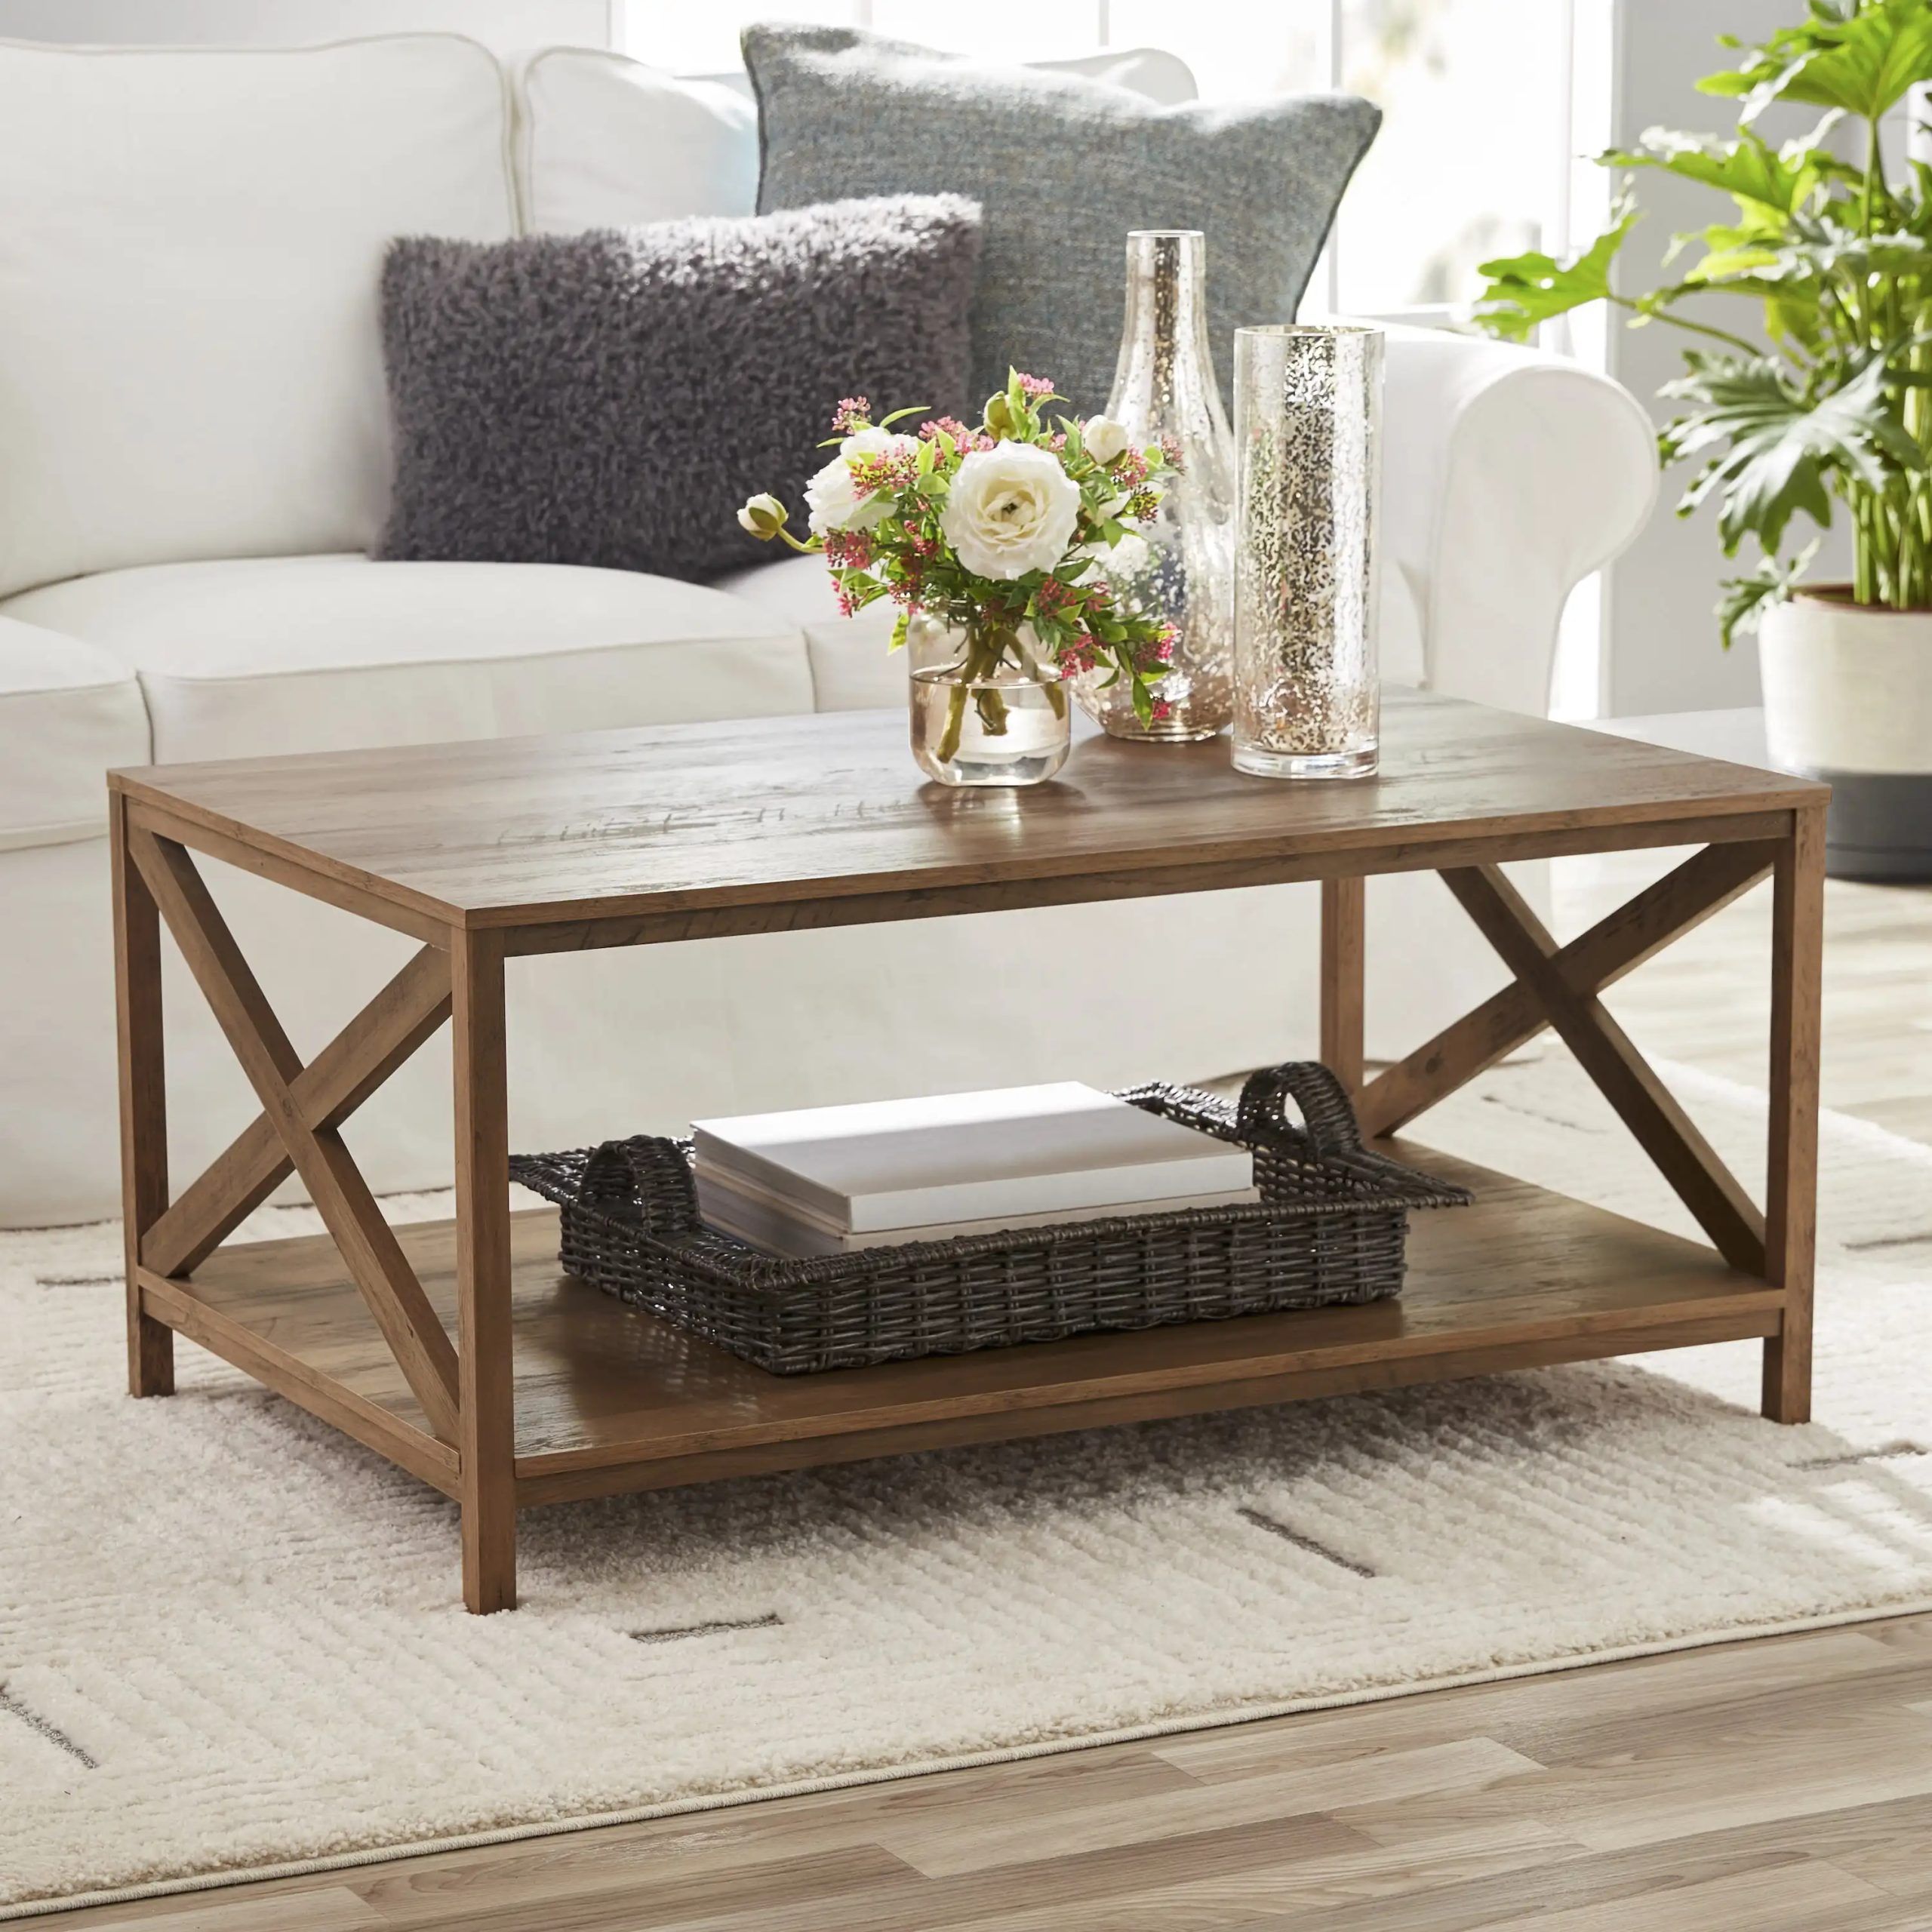 Mainstays Farmhouse X Design Rectangle Coffee Table, Black – Aliexpress With Modern Wooden X Design Coffee Tables (View 5 of 15)